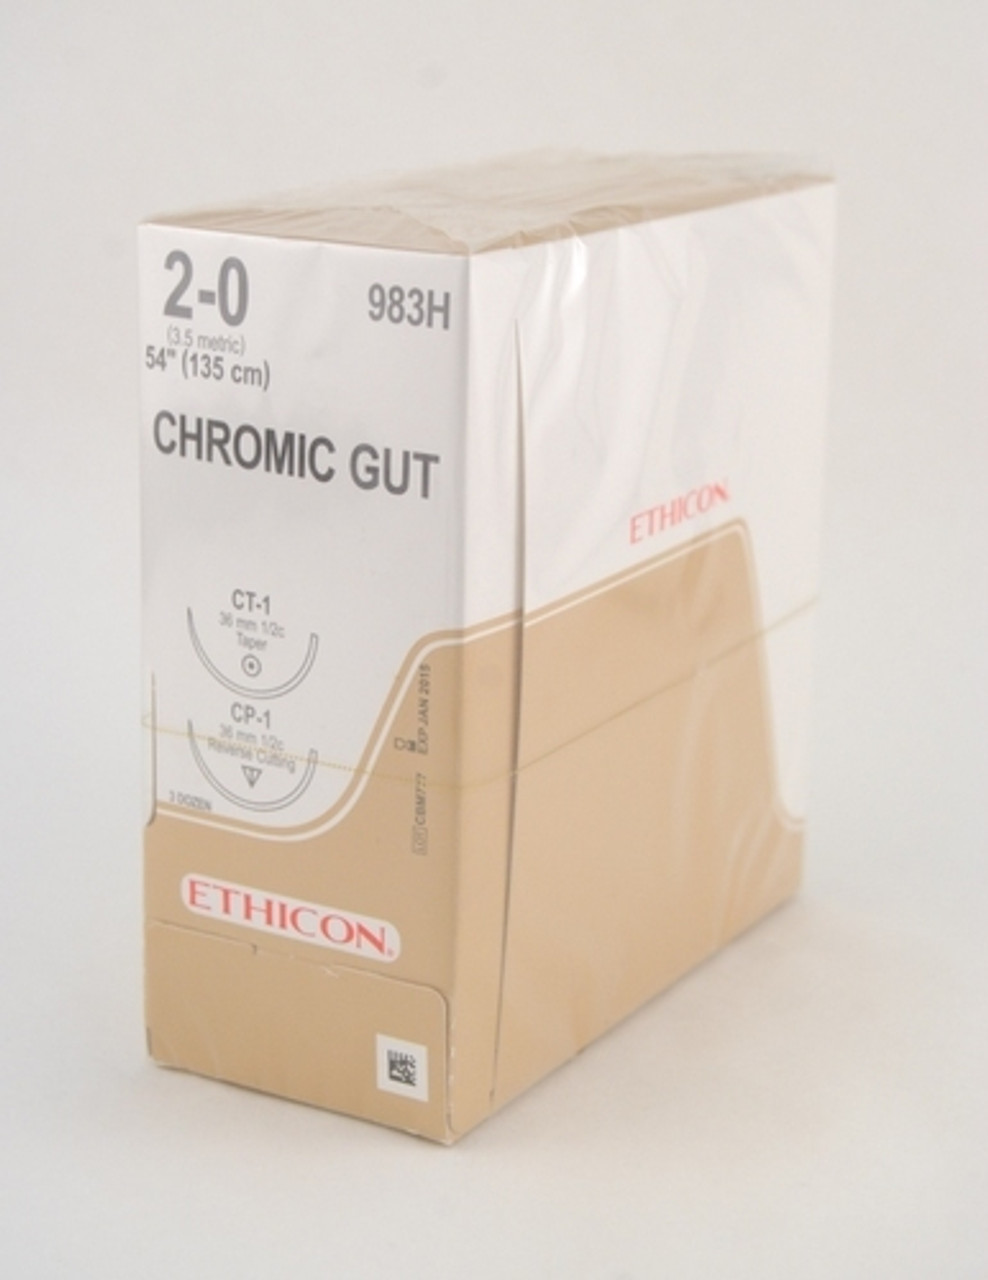 Ethicon-983H SUTURE GUT CHROMIC 2-0 54in CT-1/ CP-1 BX/36